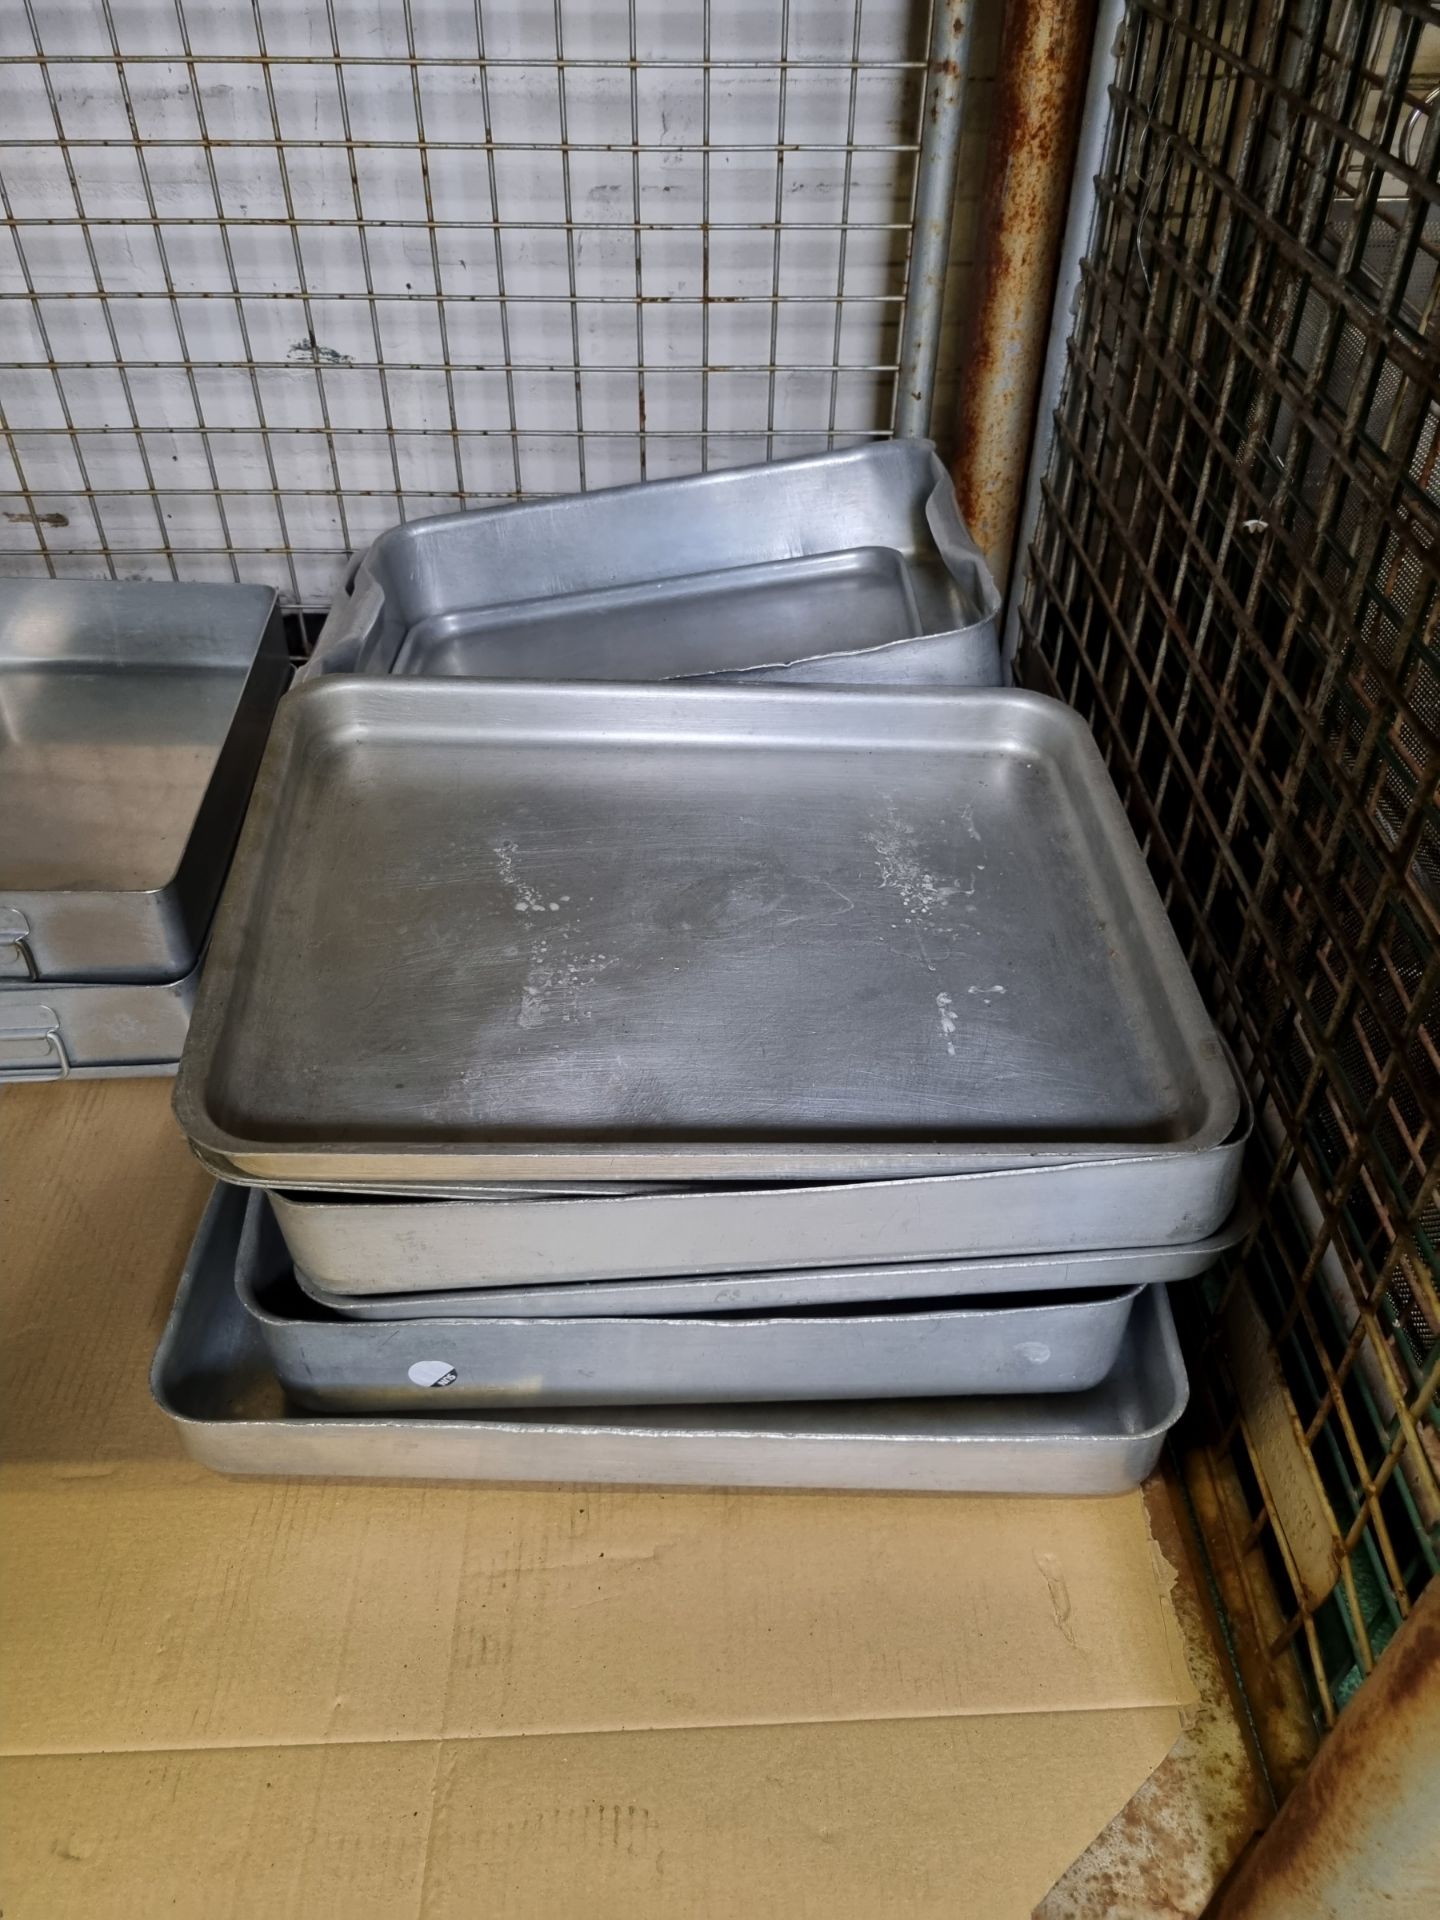 Catering equipment - roasting dishes, bakewell pans and baking trays - Image 3 of 5